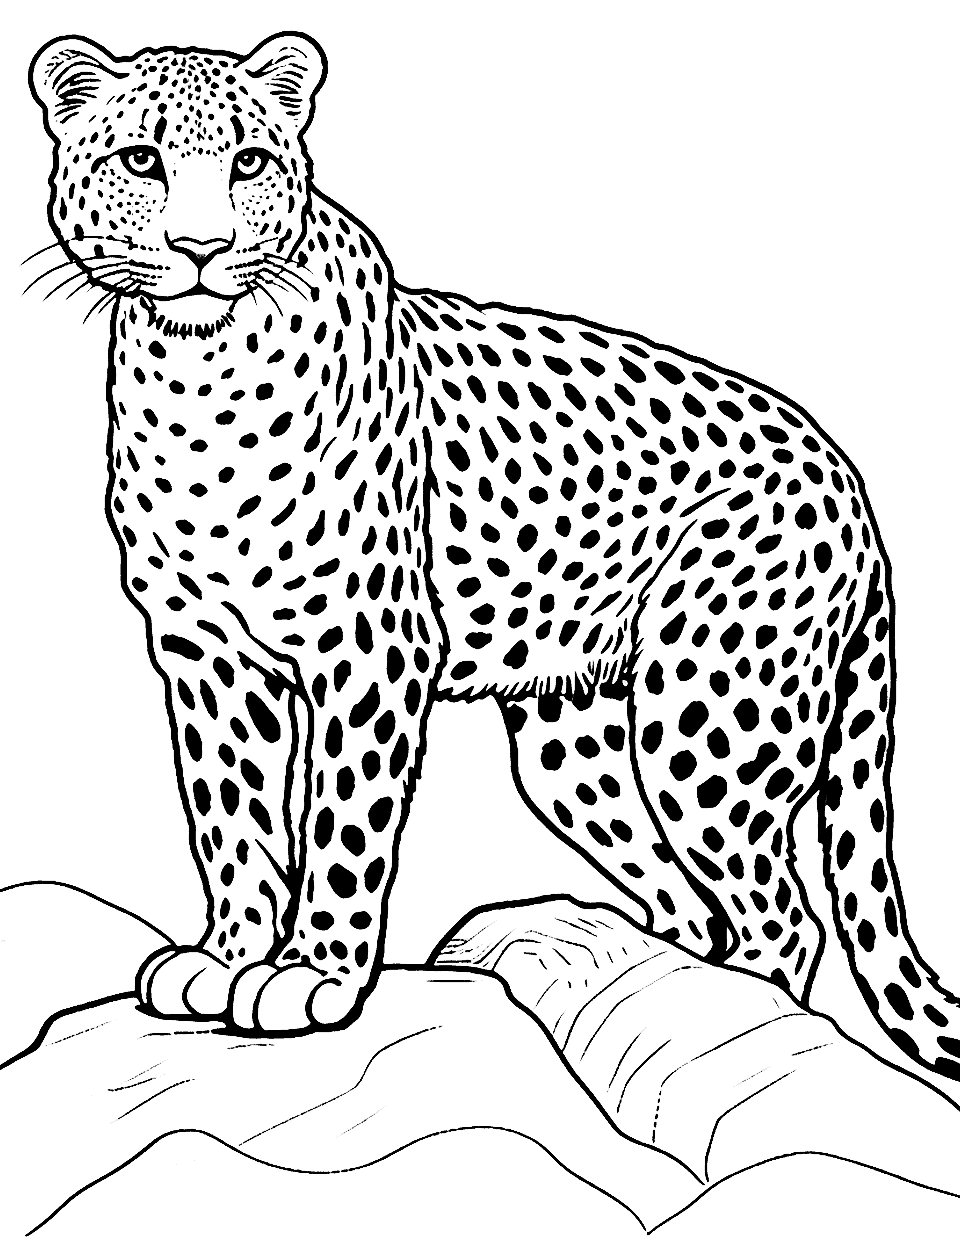 Cheetah on a Rocky Ledge Coloring Page - A cheetah perched majestically on a rocky ledge.